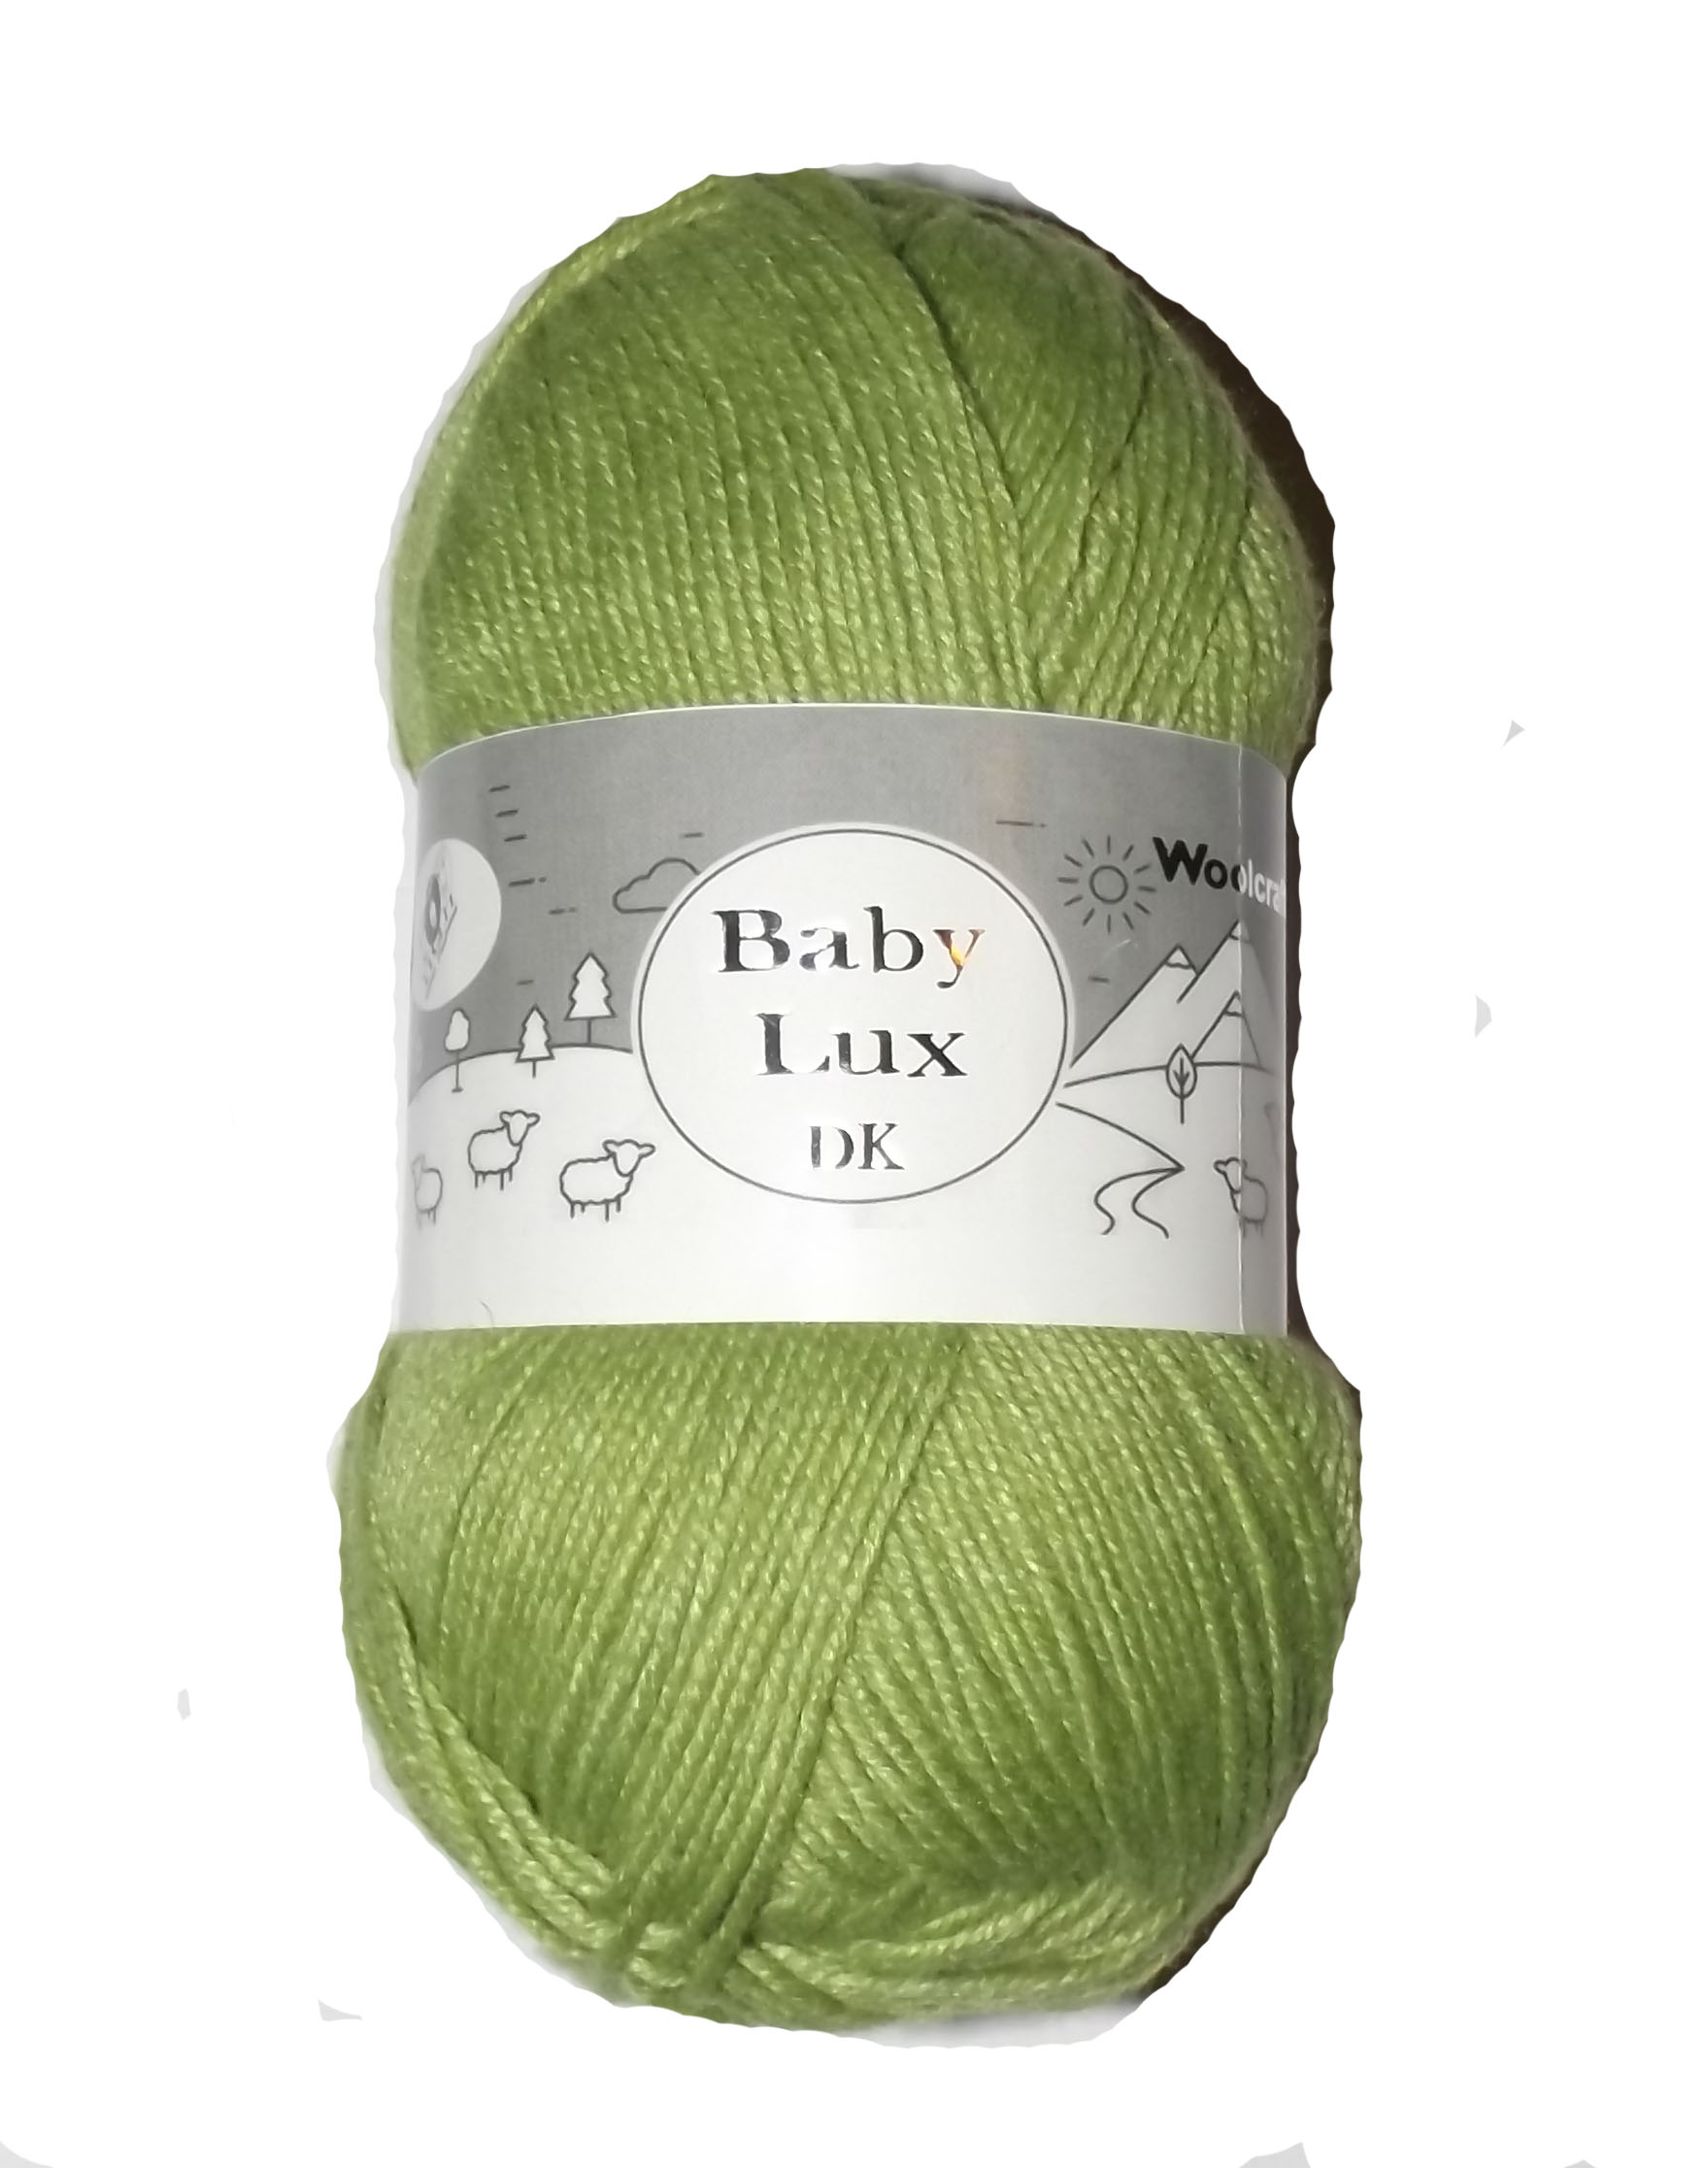 Baby Lux DK 10 x 100g Balls Apple 70445 - Click Image to Close